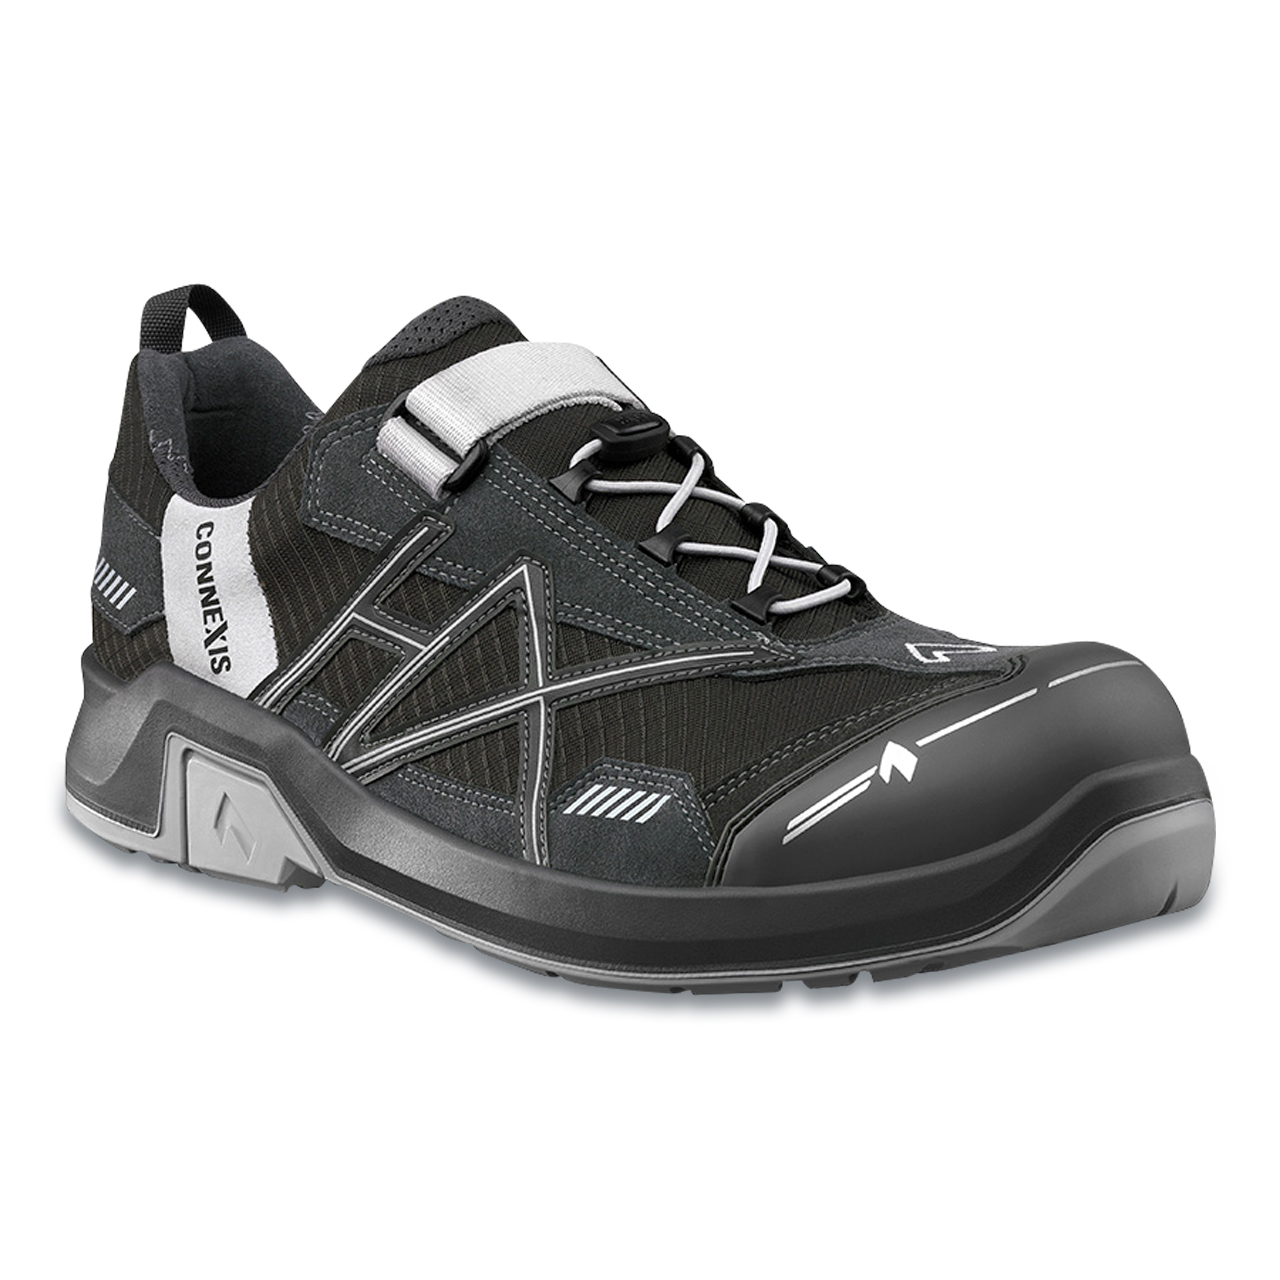 CONNEXIS® Safety T S1P low Black-silver UK 9.5